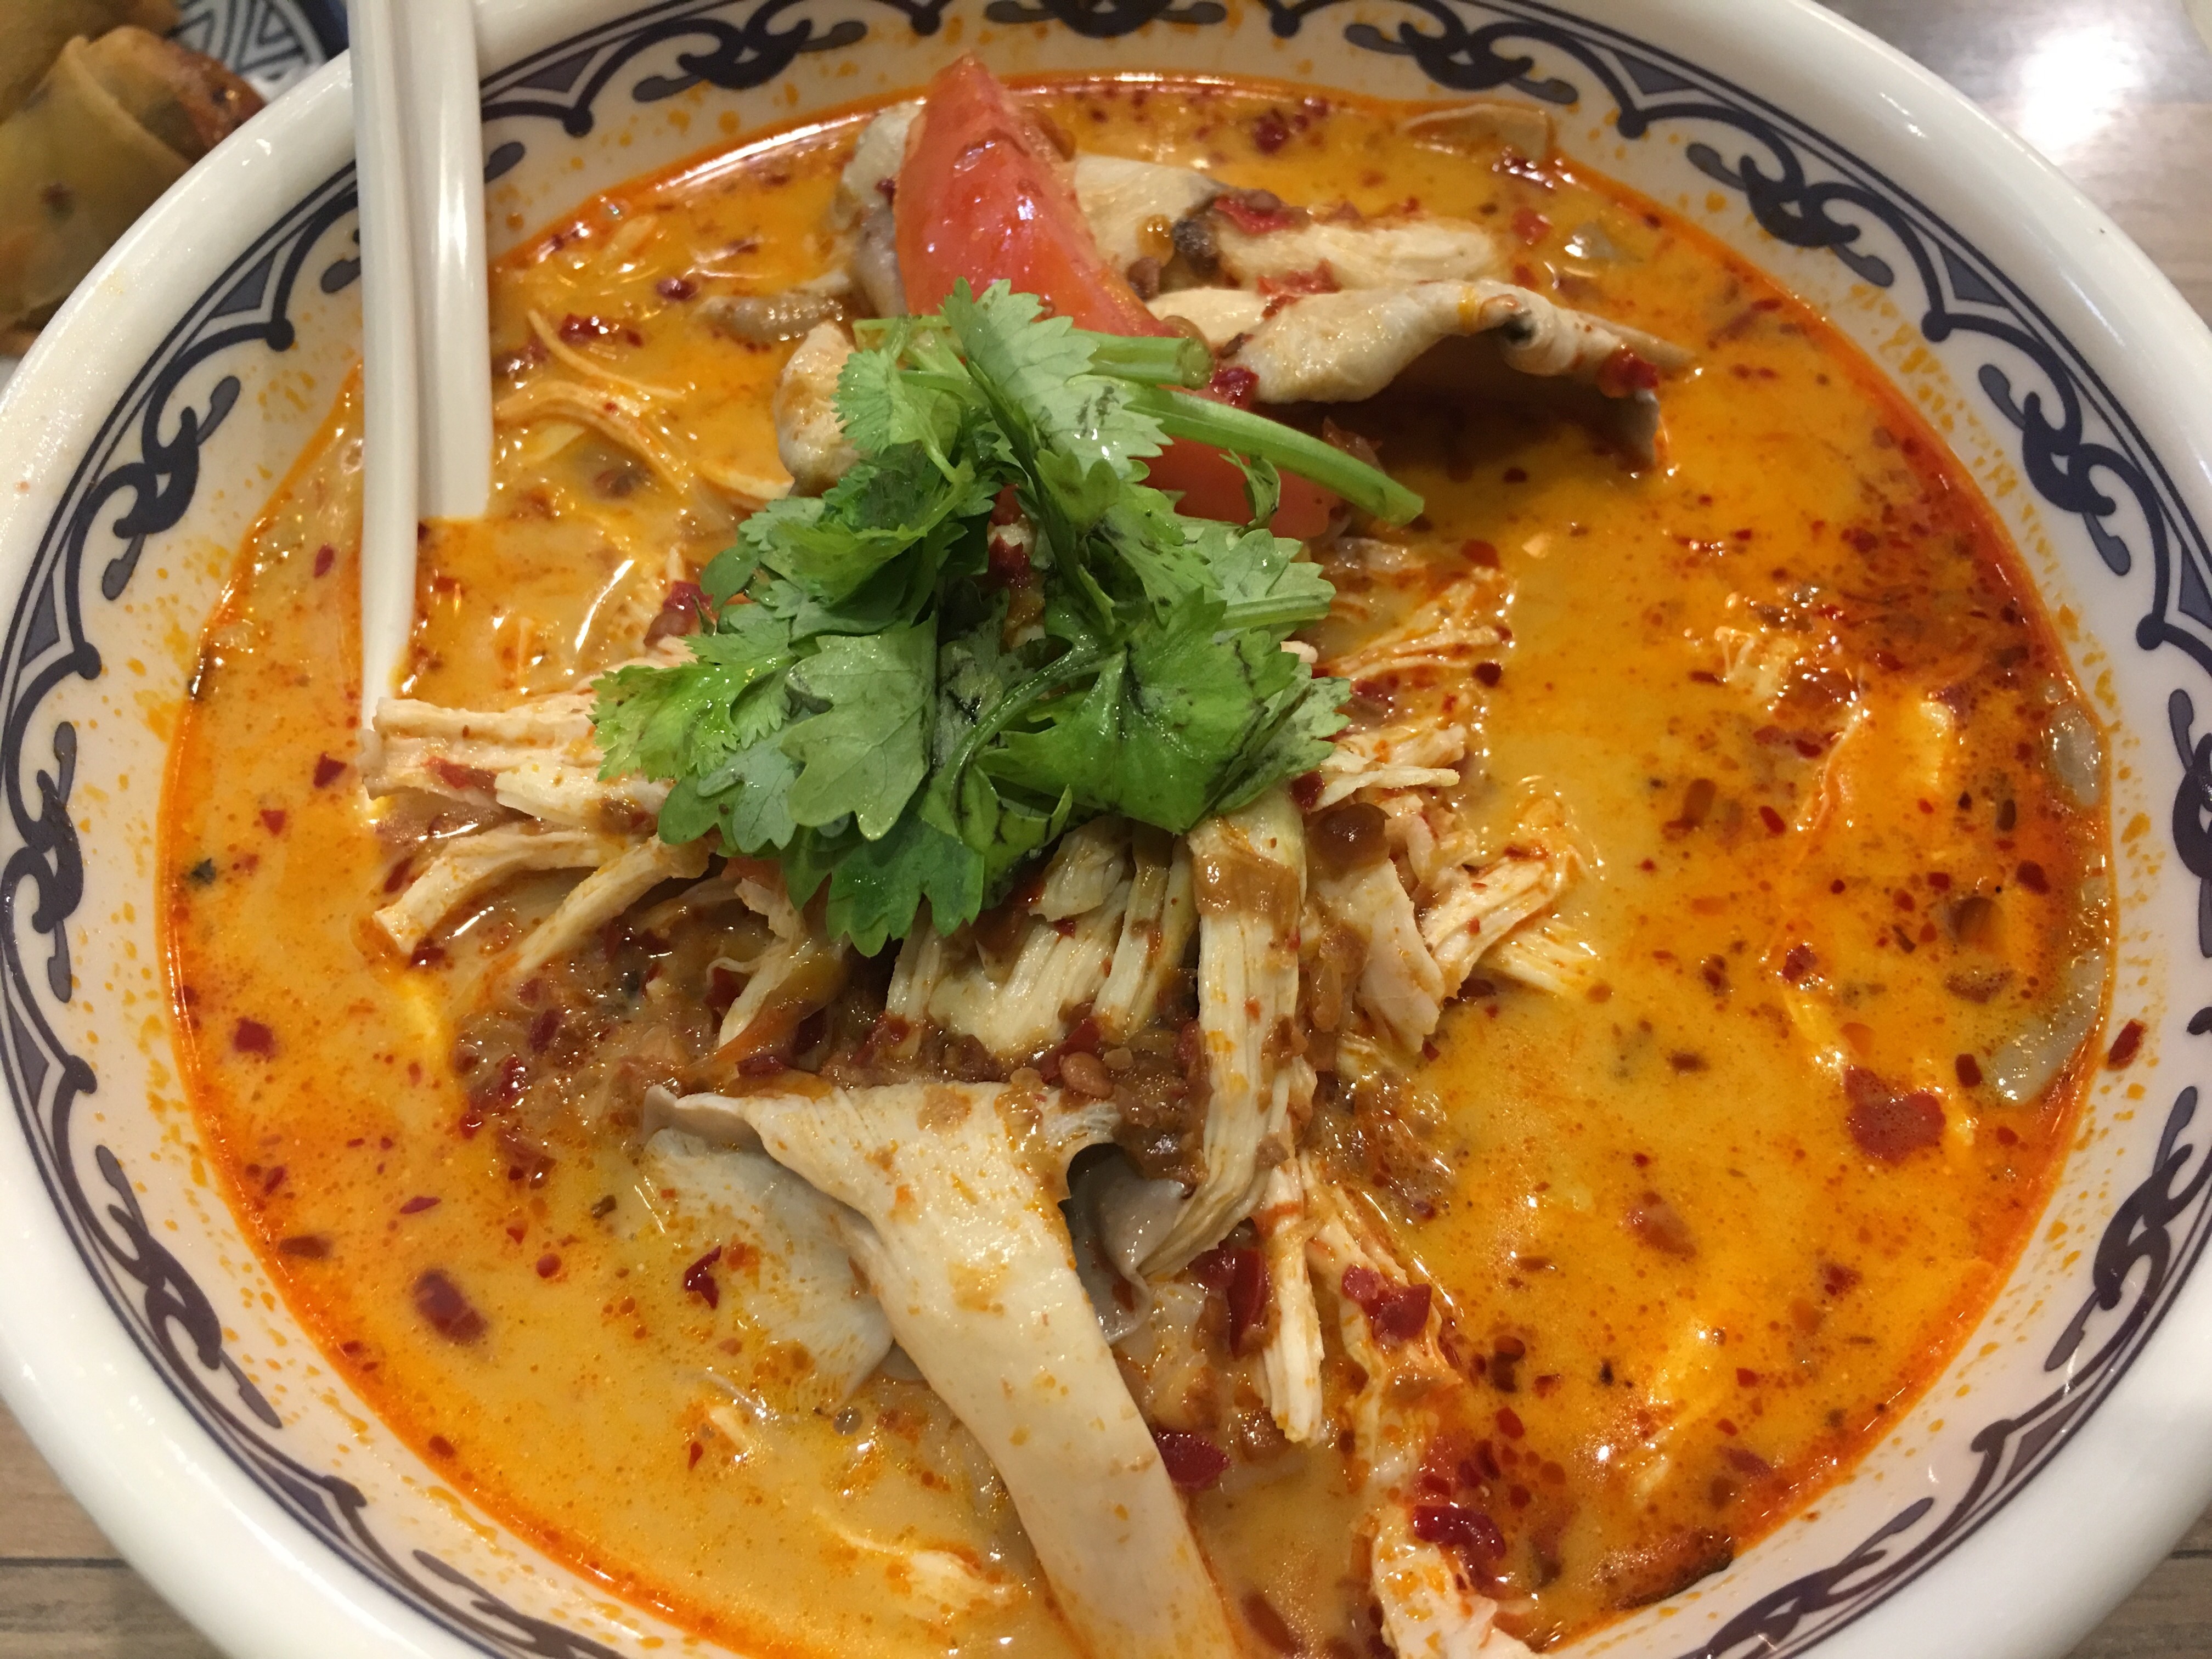 Tom Yun Goong chicken soup with rice at Golden Prince Thai Restaurant in Causeway Bay. Photo: Oasis Li